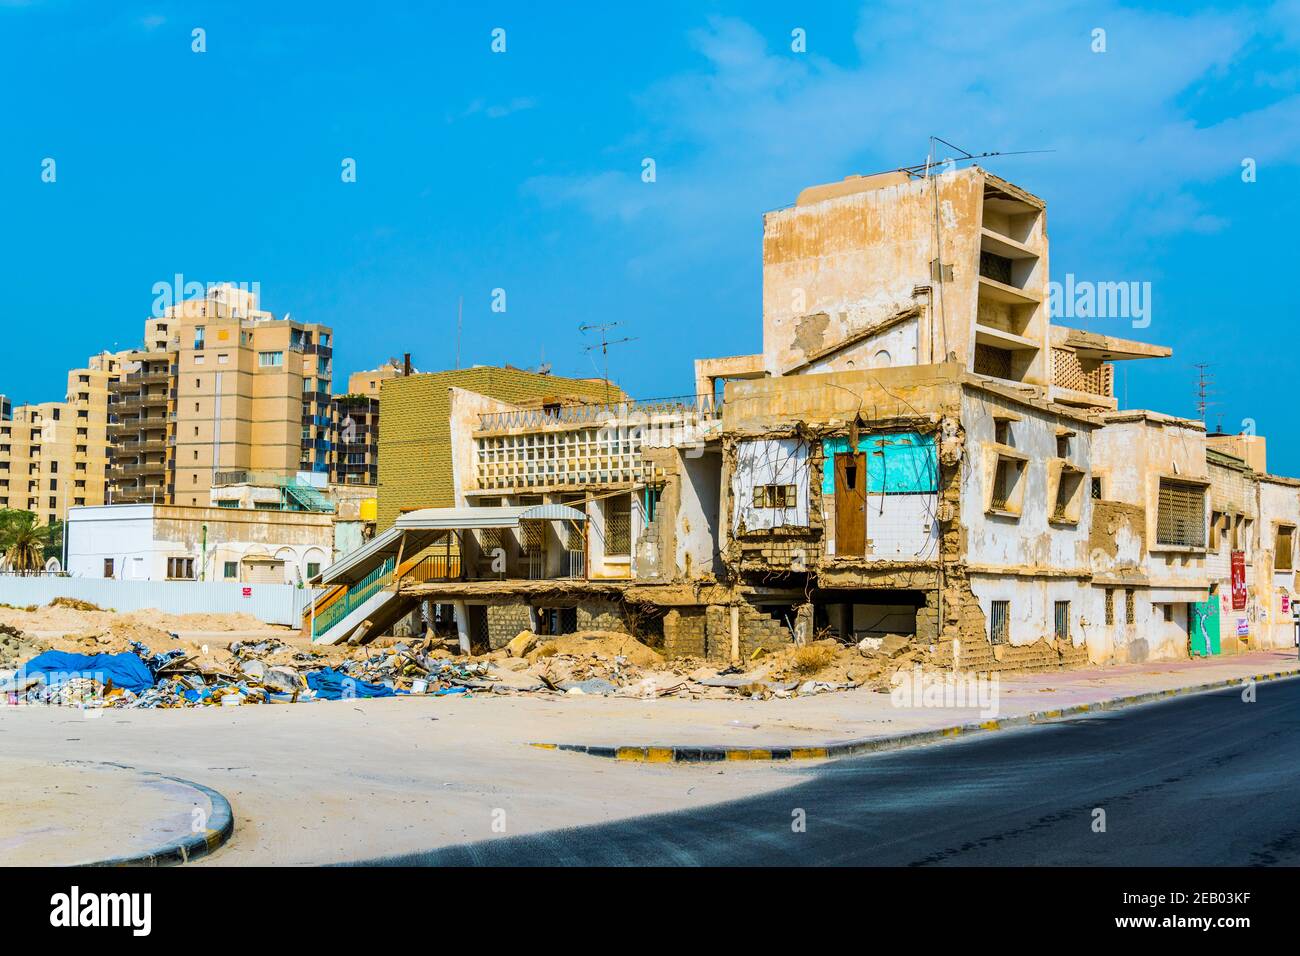 KUWAIT CITY, KUWAIT, NOVEMBER 5, 2016: View of a destroyed house in the central Kuwait. Many houses in the whole country have been destroyed during Ir Stock Photo